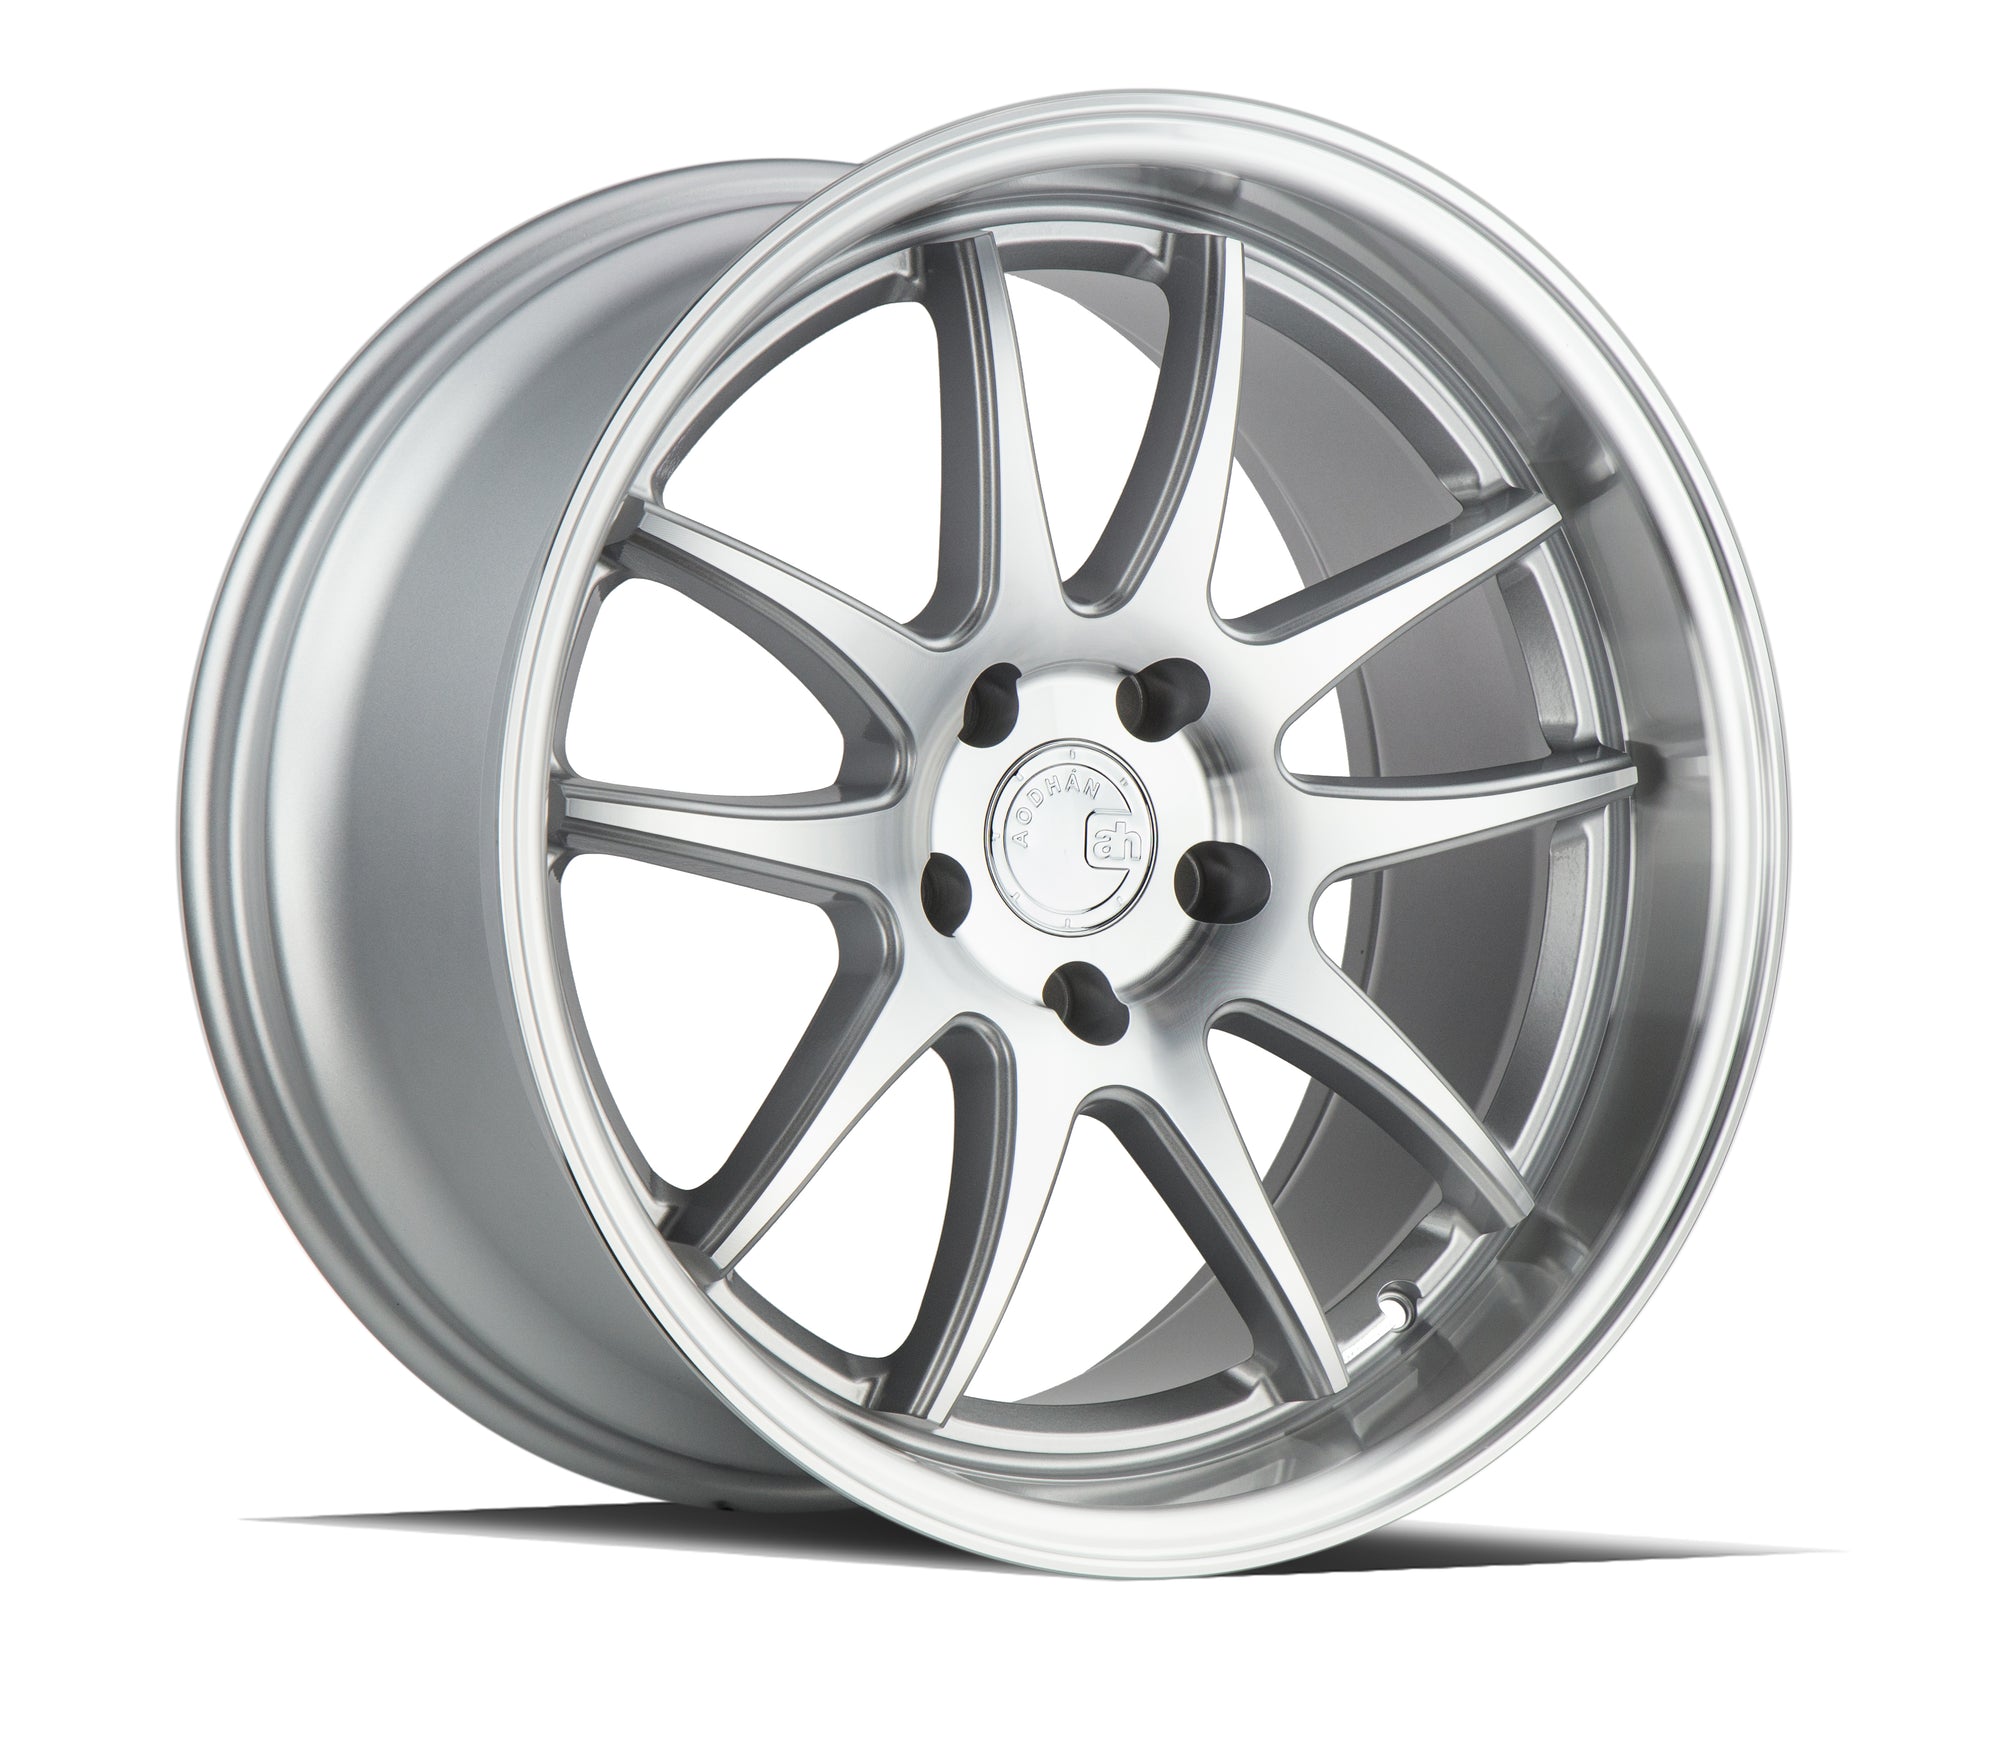 Aodhan DS02 19x9.5 5x114.3 +15 Silver W/Machined Face